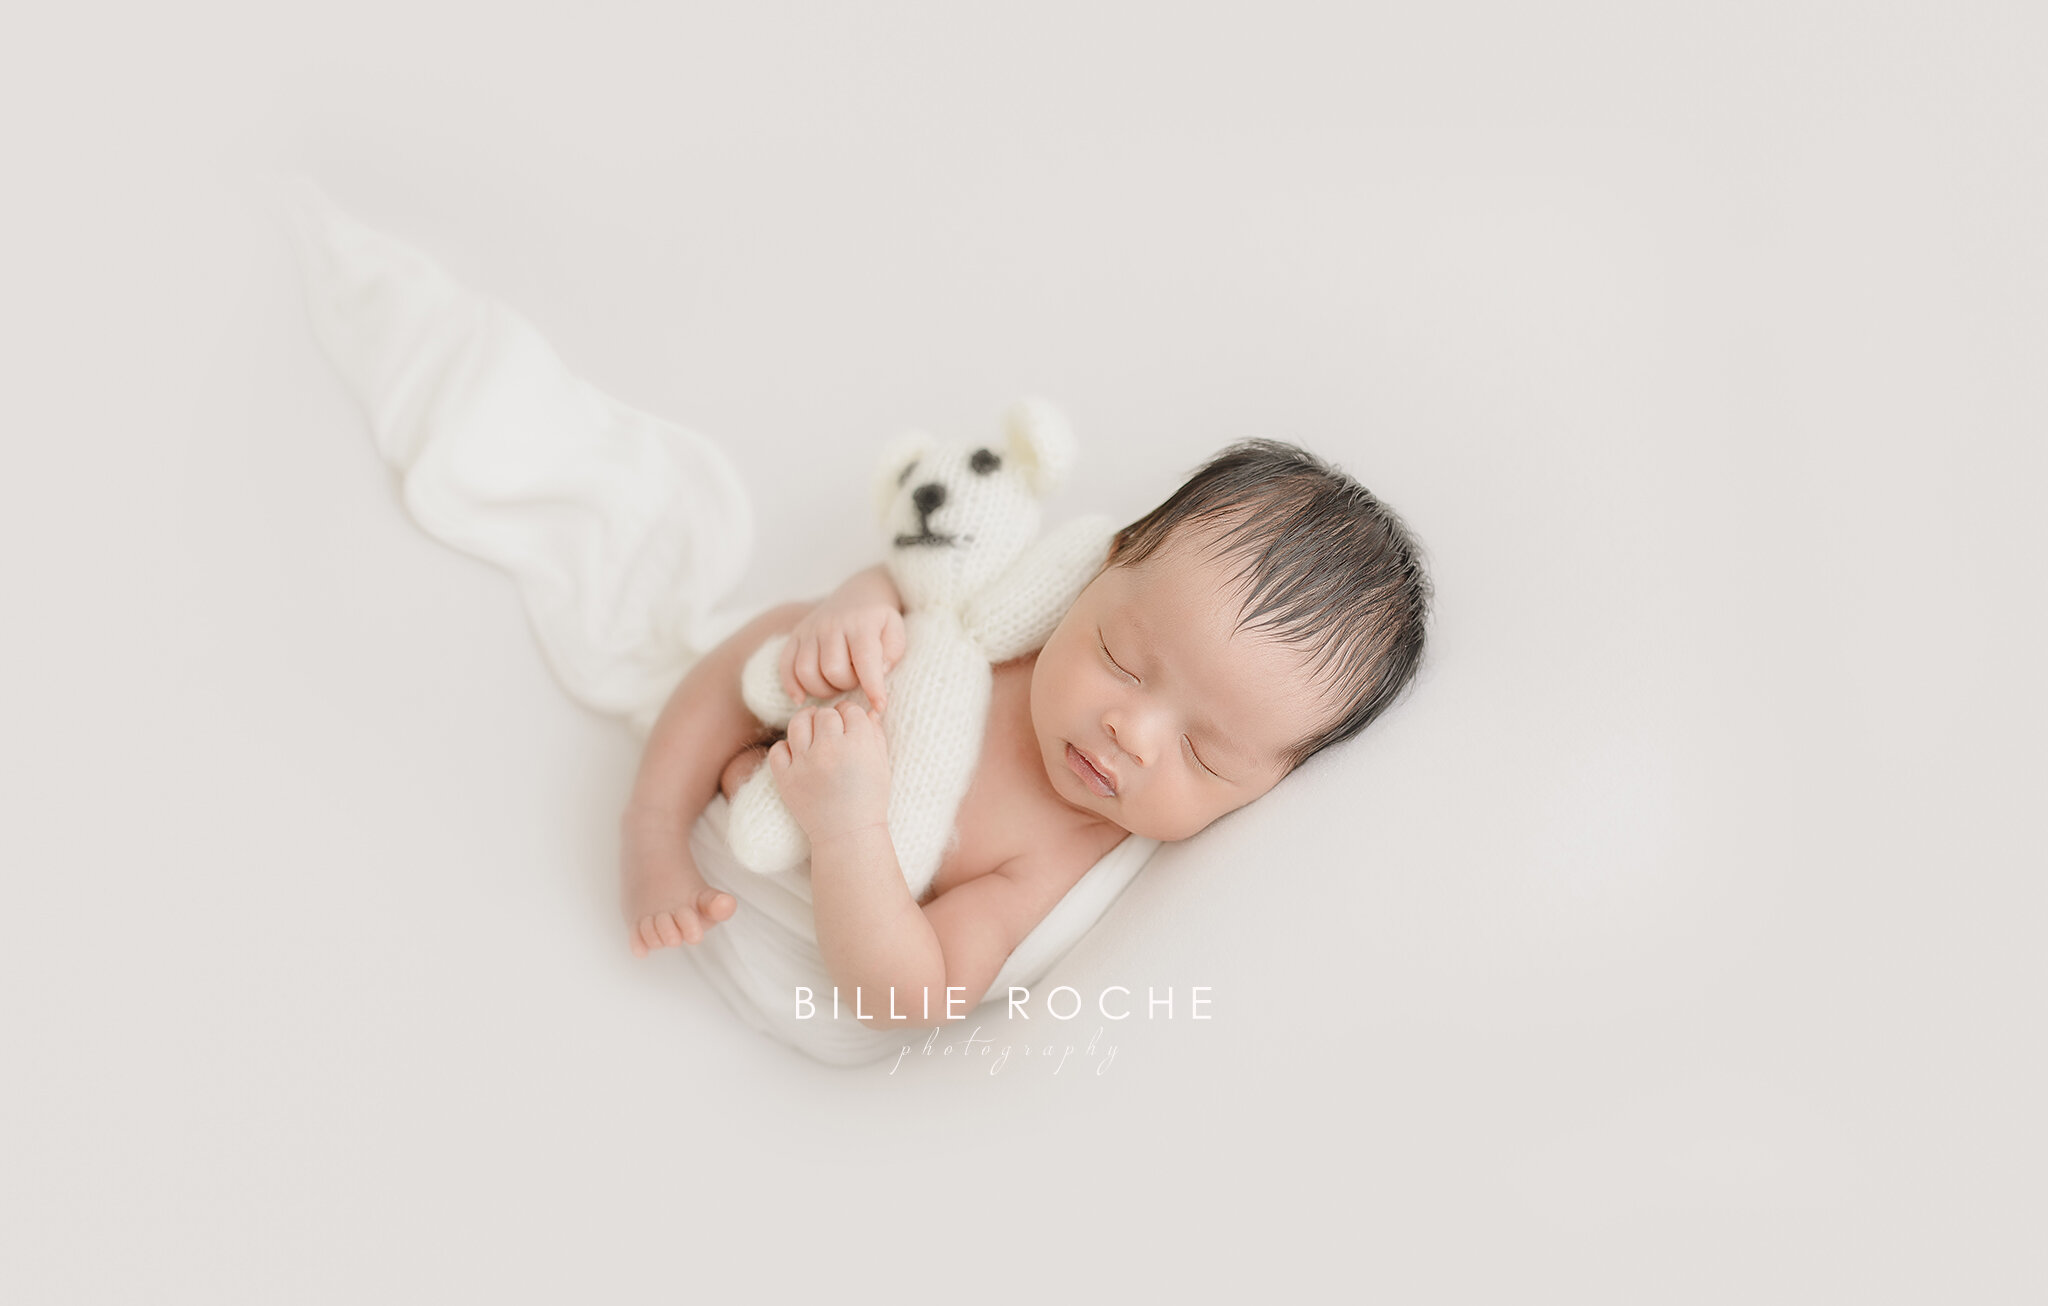  Billie Roche Photography  is an award winning photographer specializing in newborn, maternity, baby and family photography in Houston, Texas. Serving surrounding areas like Fulshear, Katy, Richmond, Sugar Land, Missouri, Rosenberg, Cypress, Spring,R